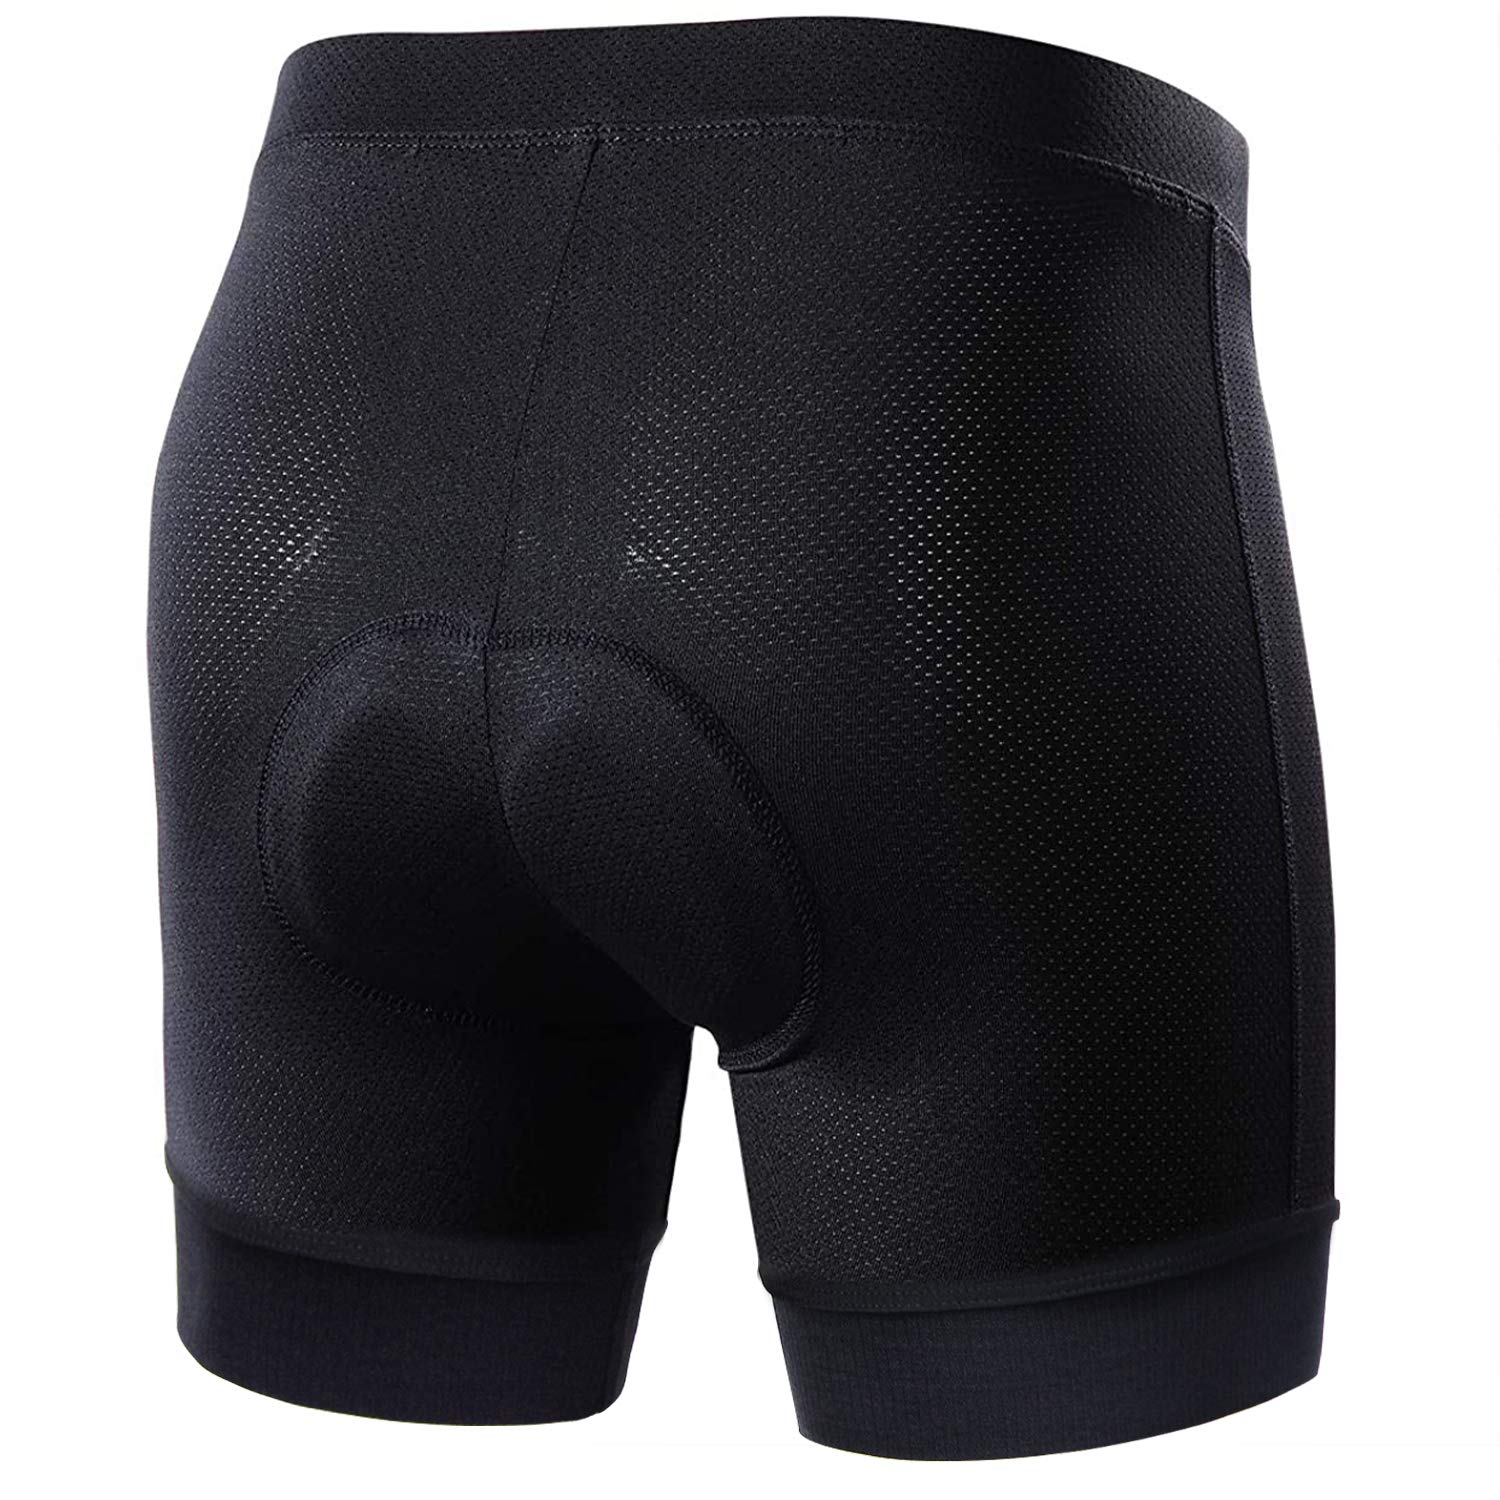 Women's Cycling Underwear Shorts Breathable Lightweight Bike Shorts 4D  Padded